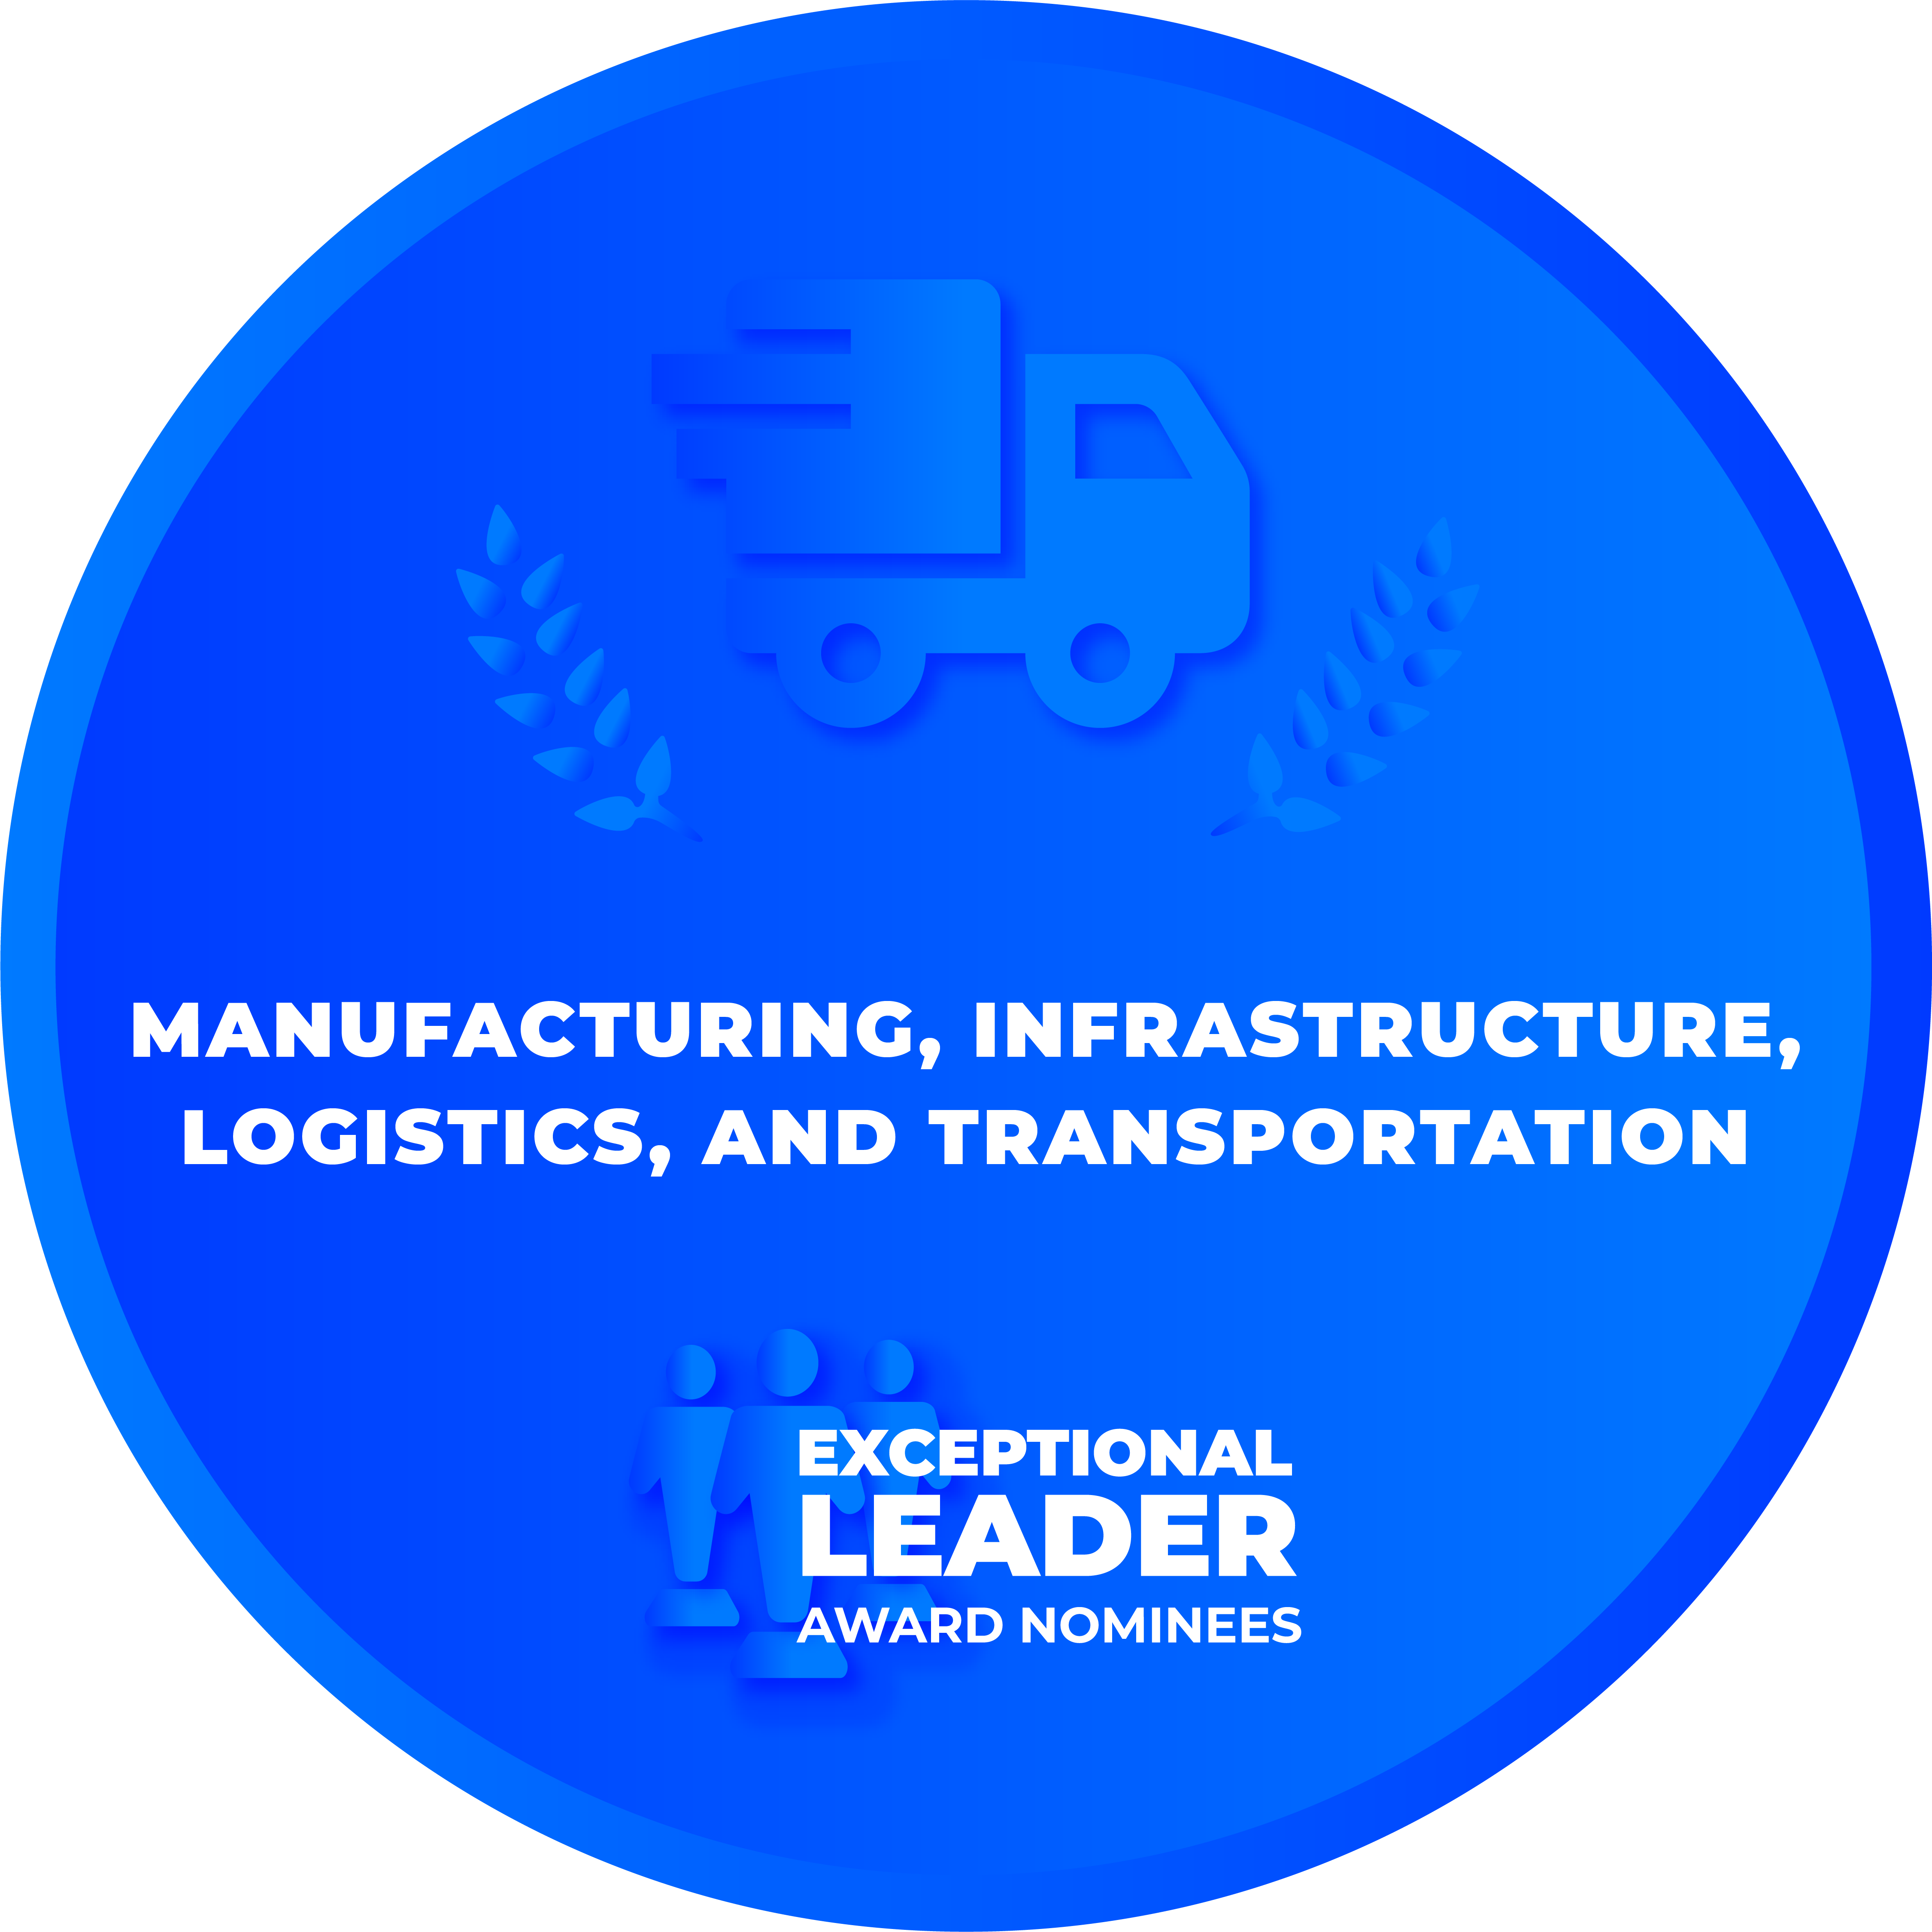 CRCA 2022 - EXCEPTIONAL LEADER AWARDS - Manufacturing Infrastructure Logistics and Transportation